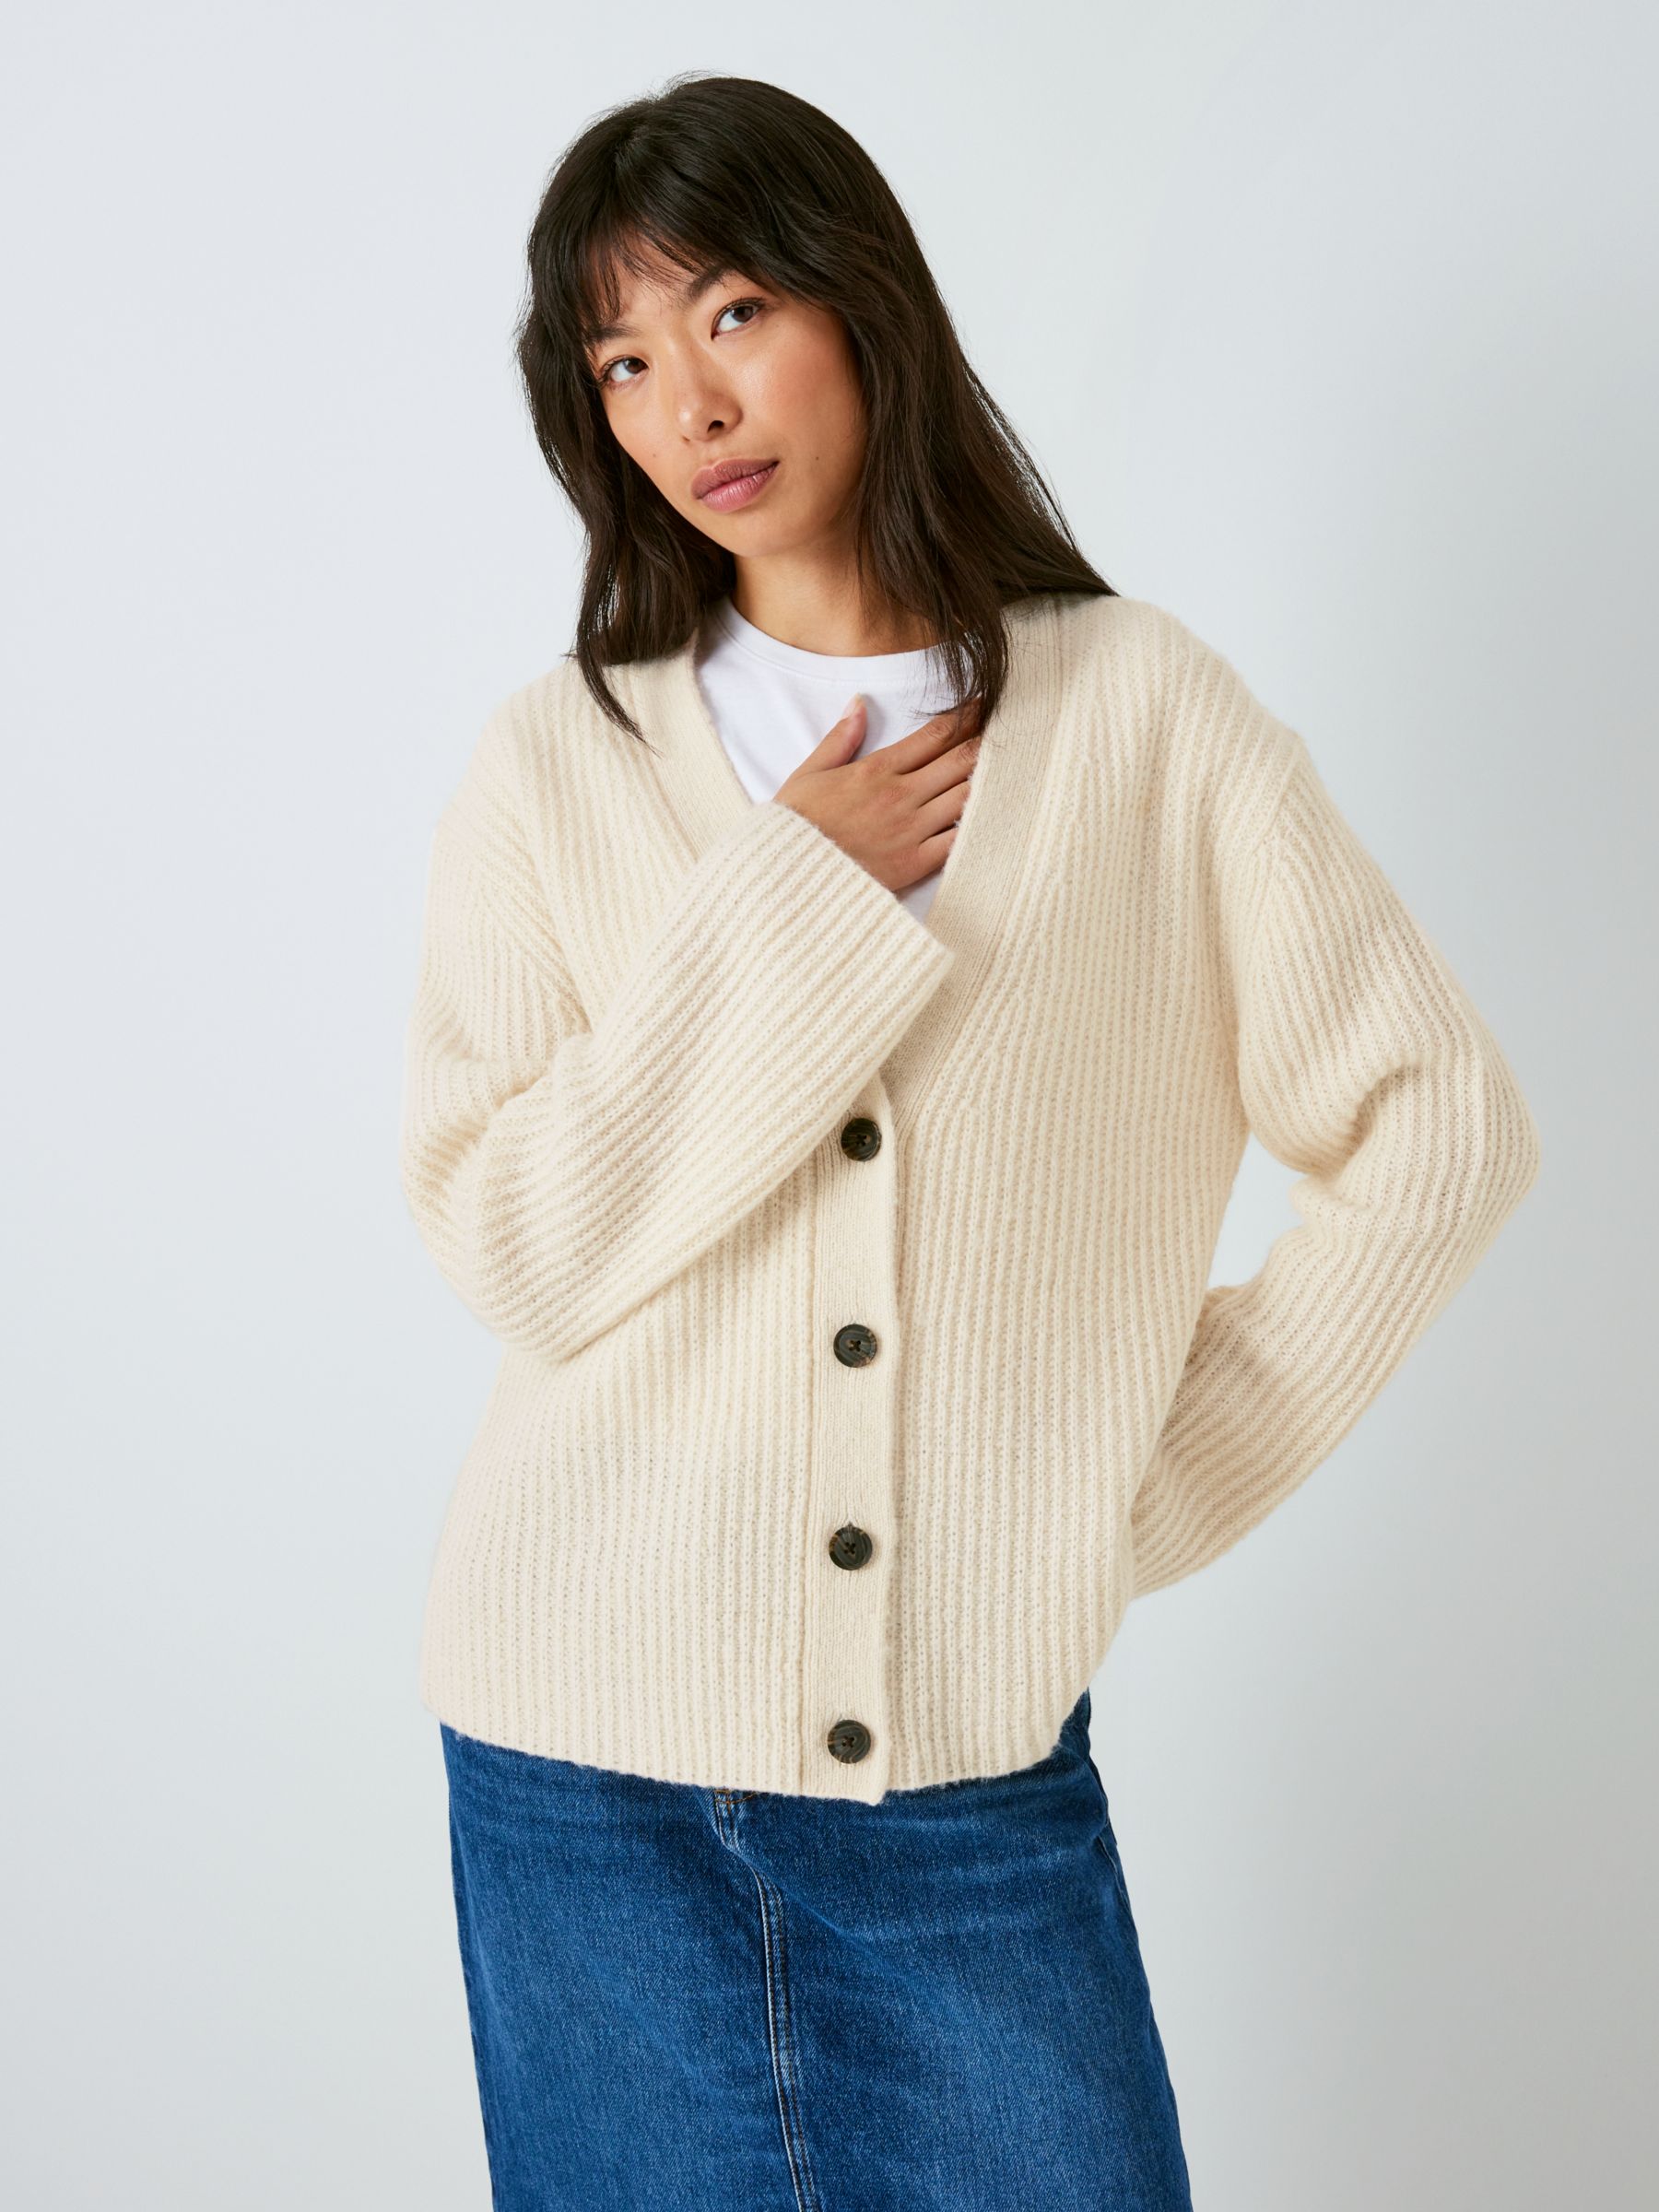 AND/OR Jeanie Wool Blend Boxy Cardigan, Cream at John Lewis & Partners